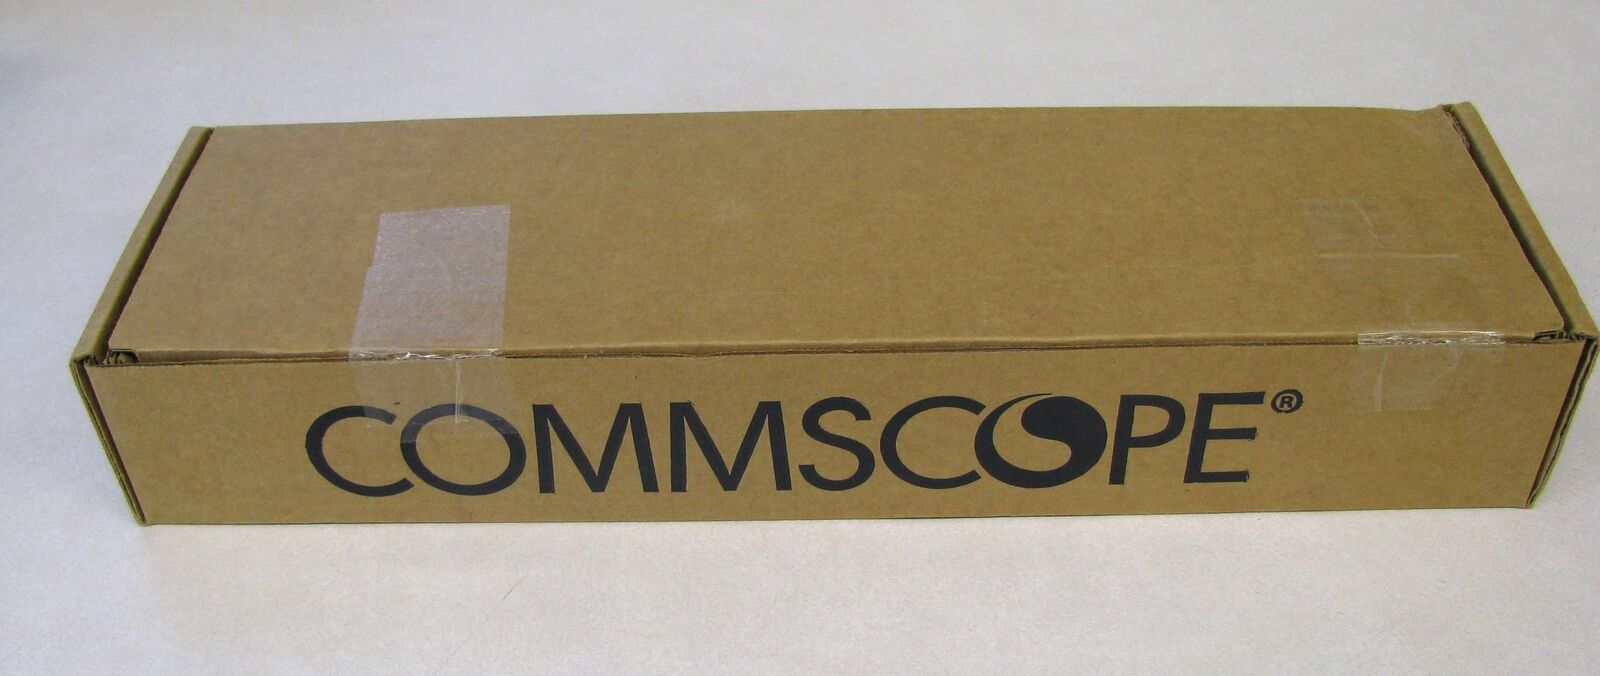 Commscope Systimax Evolve 24-Port Cat6 1100 GS3 Patch Panel 760152561 ~STSI